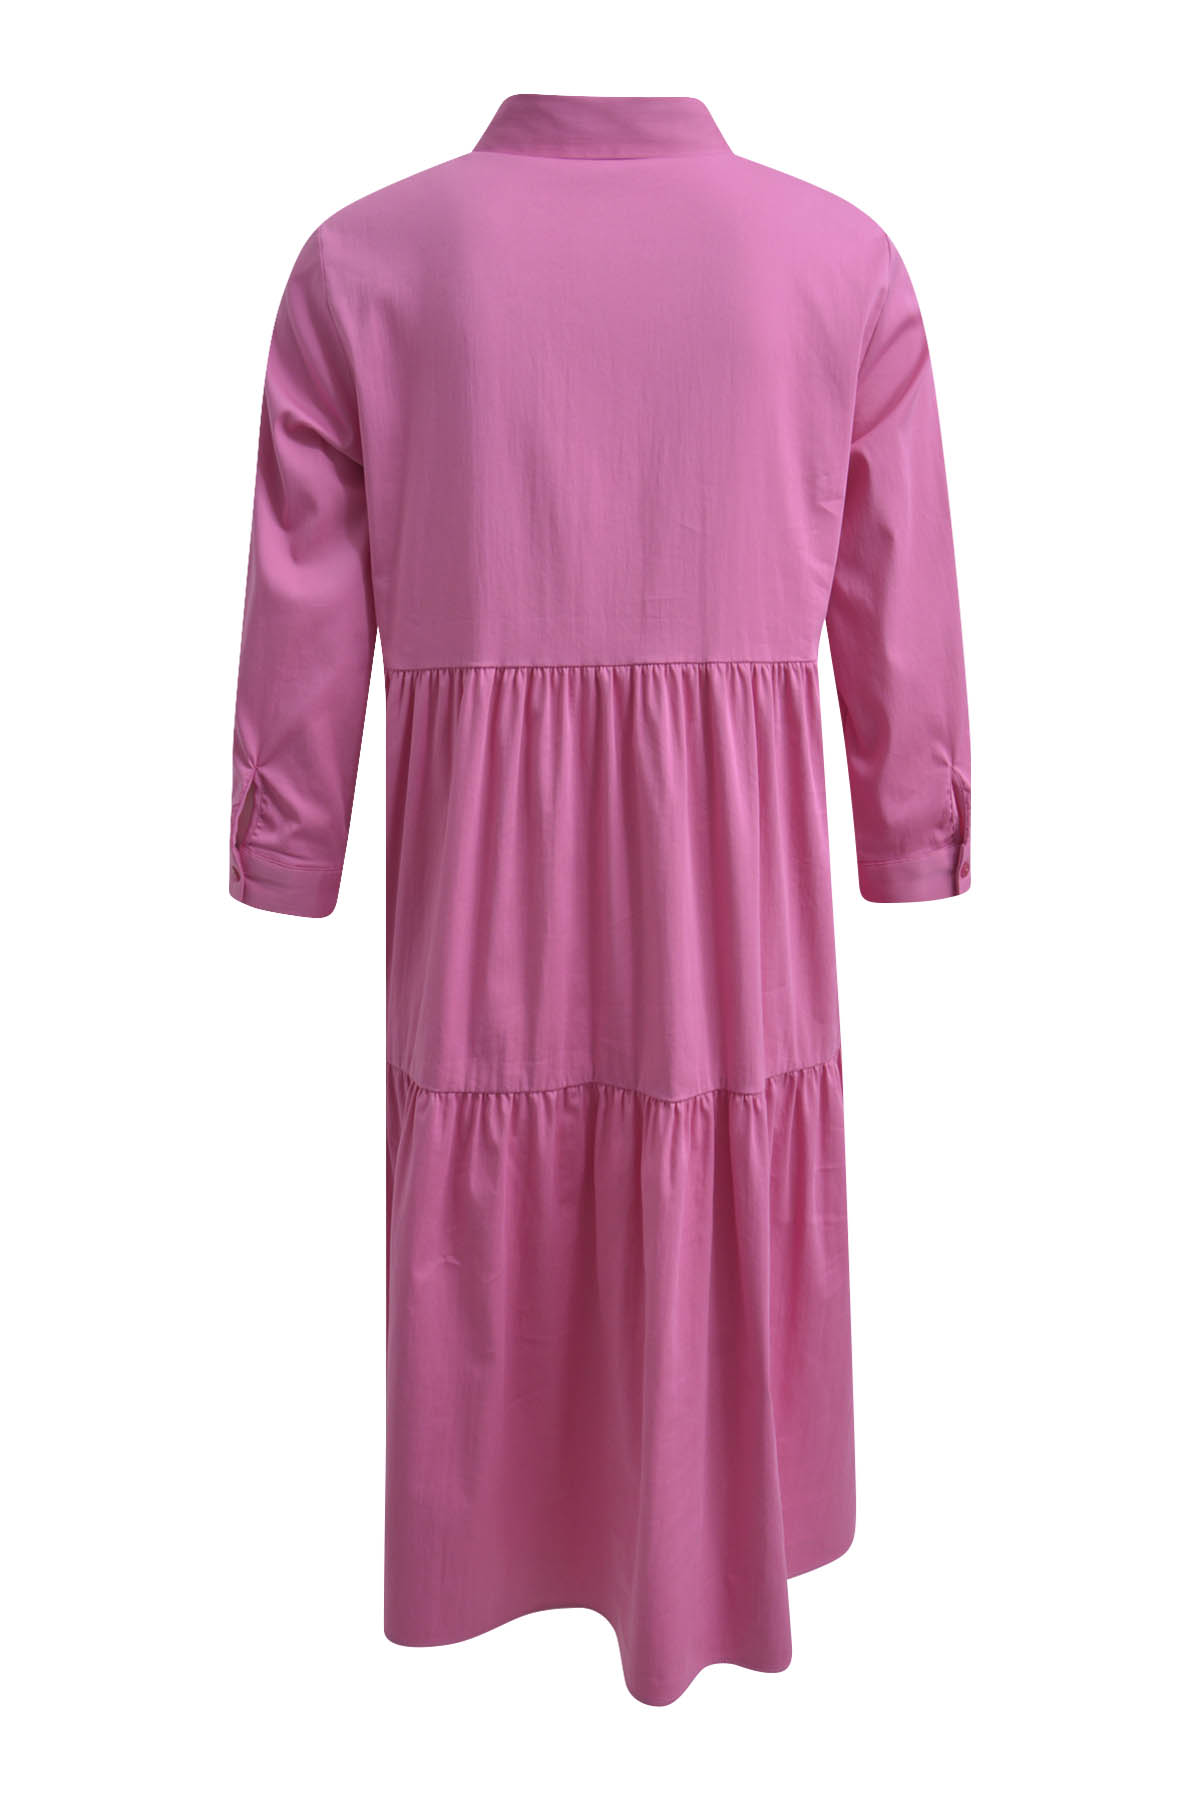 DRESS W COLLAR AND PLACKET, 3/4 SLE